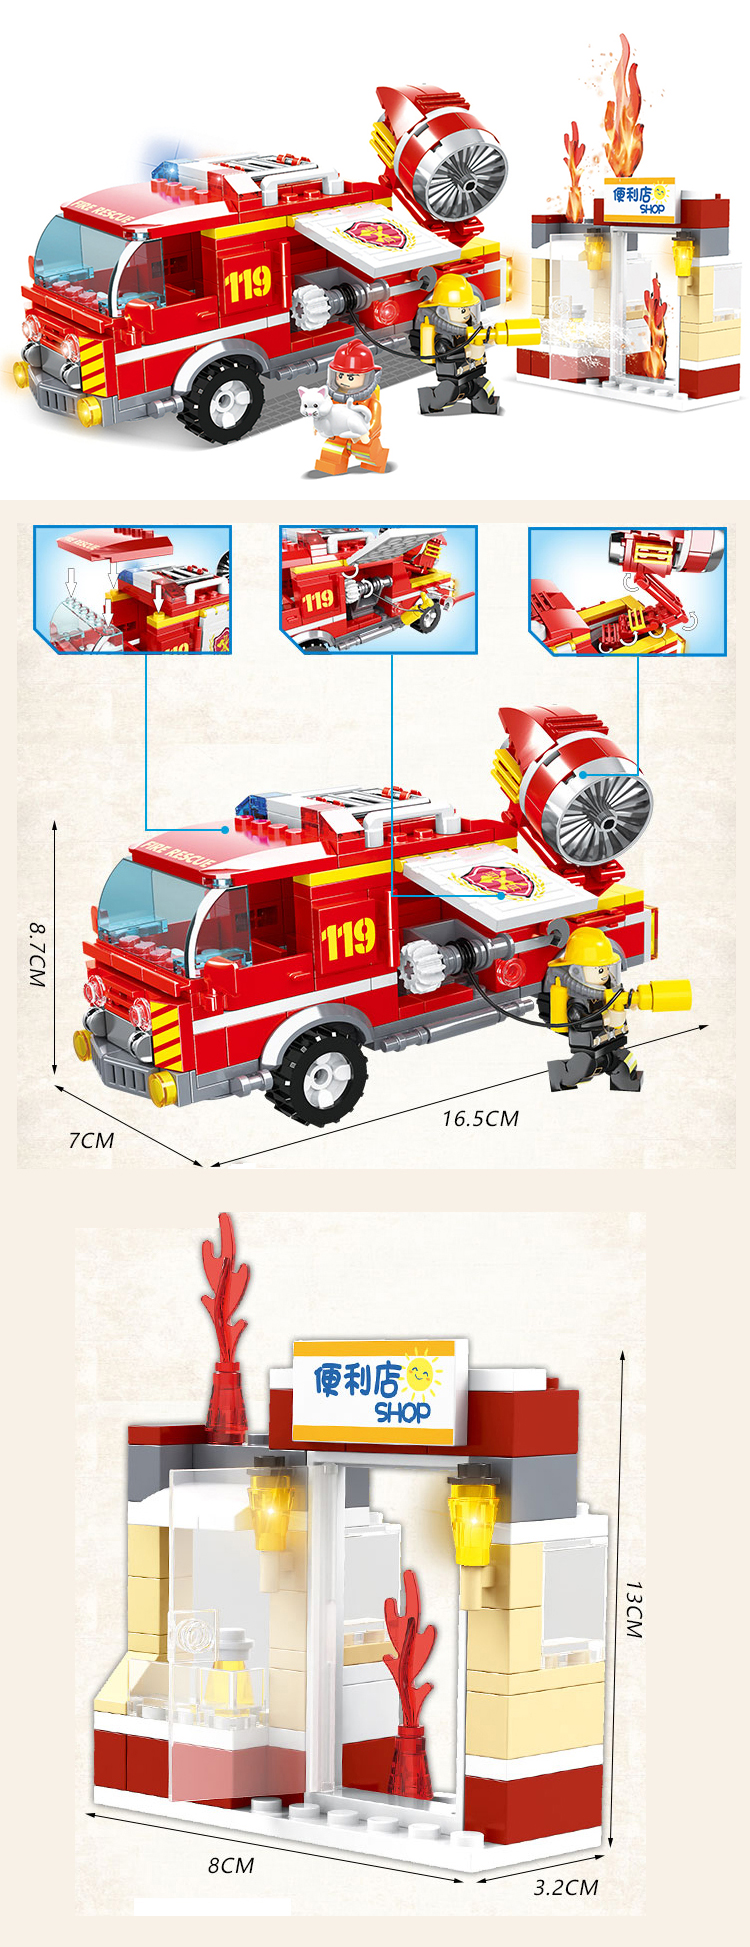 WOMA TOYS Compatible Major Brands Bricks Fire Truck Small Building Blocks Educational Brick Toys Ages 6